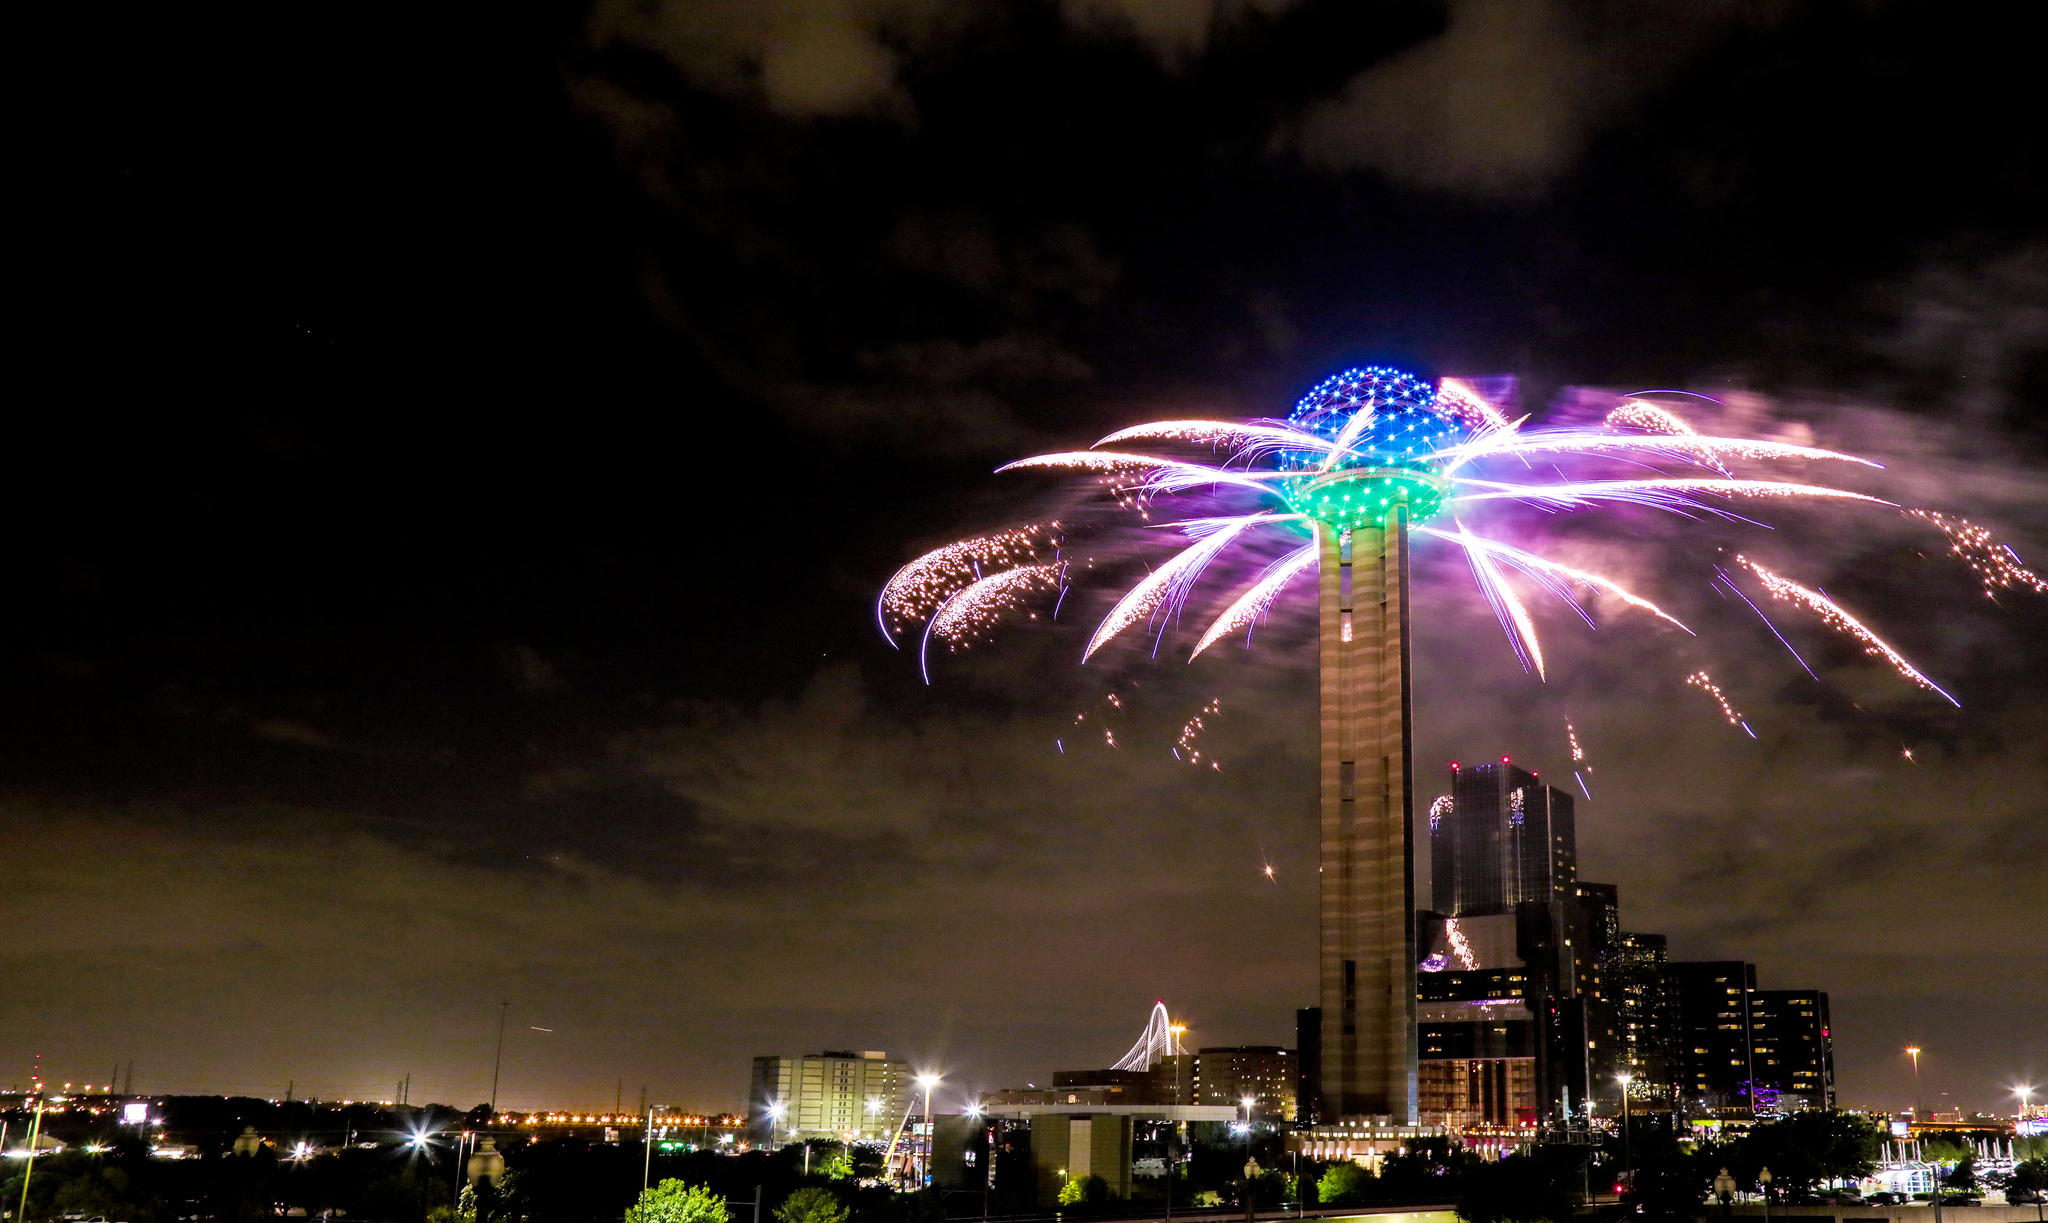 EVENTS 4th of July fireworks in DFW